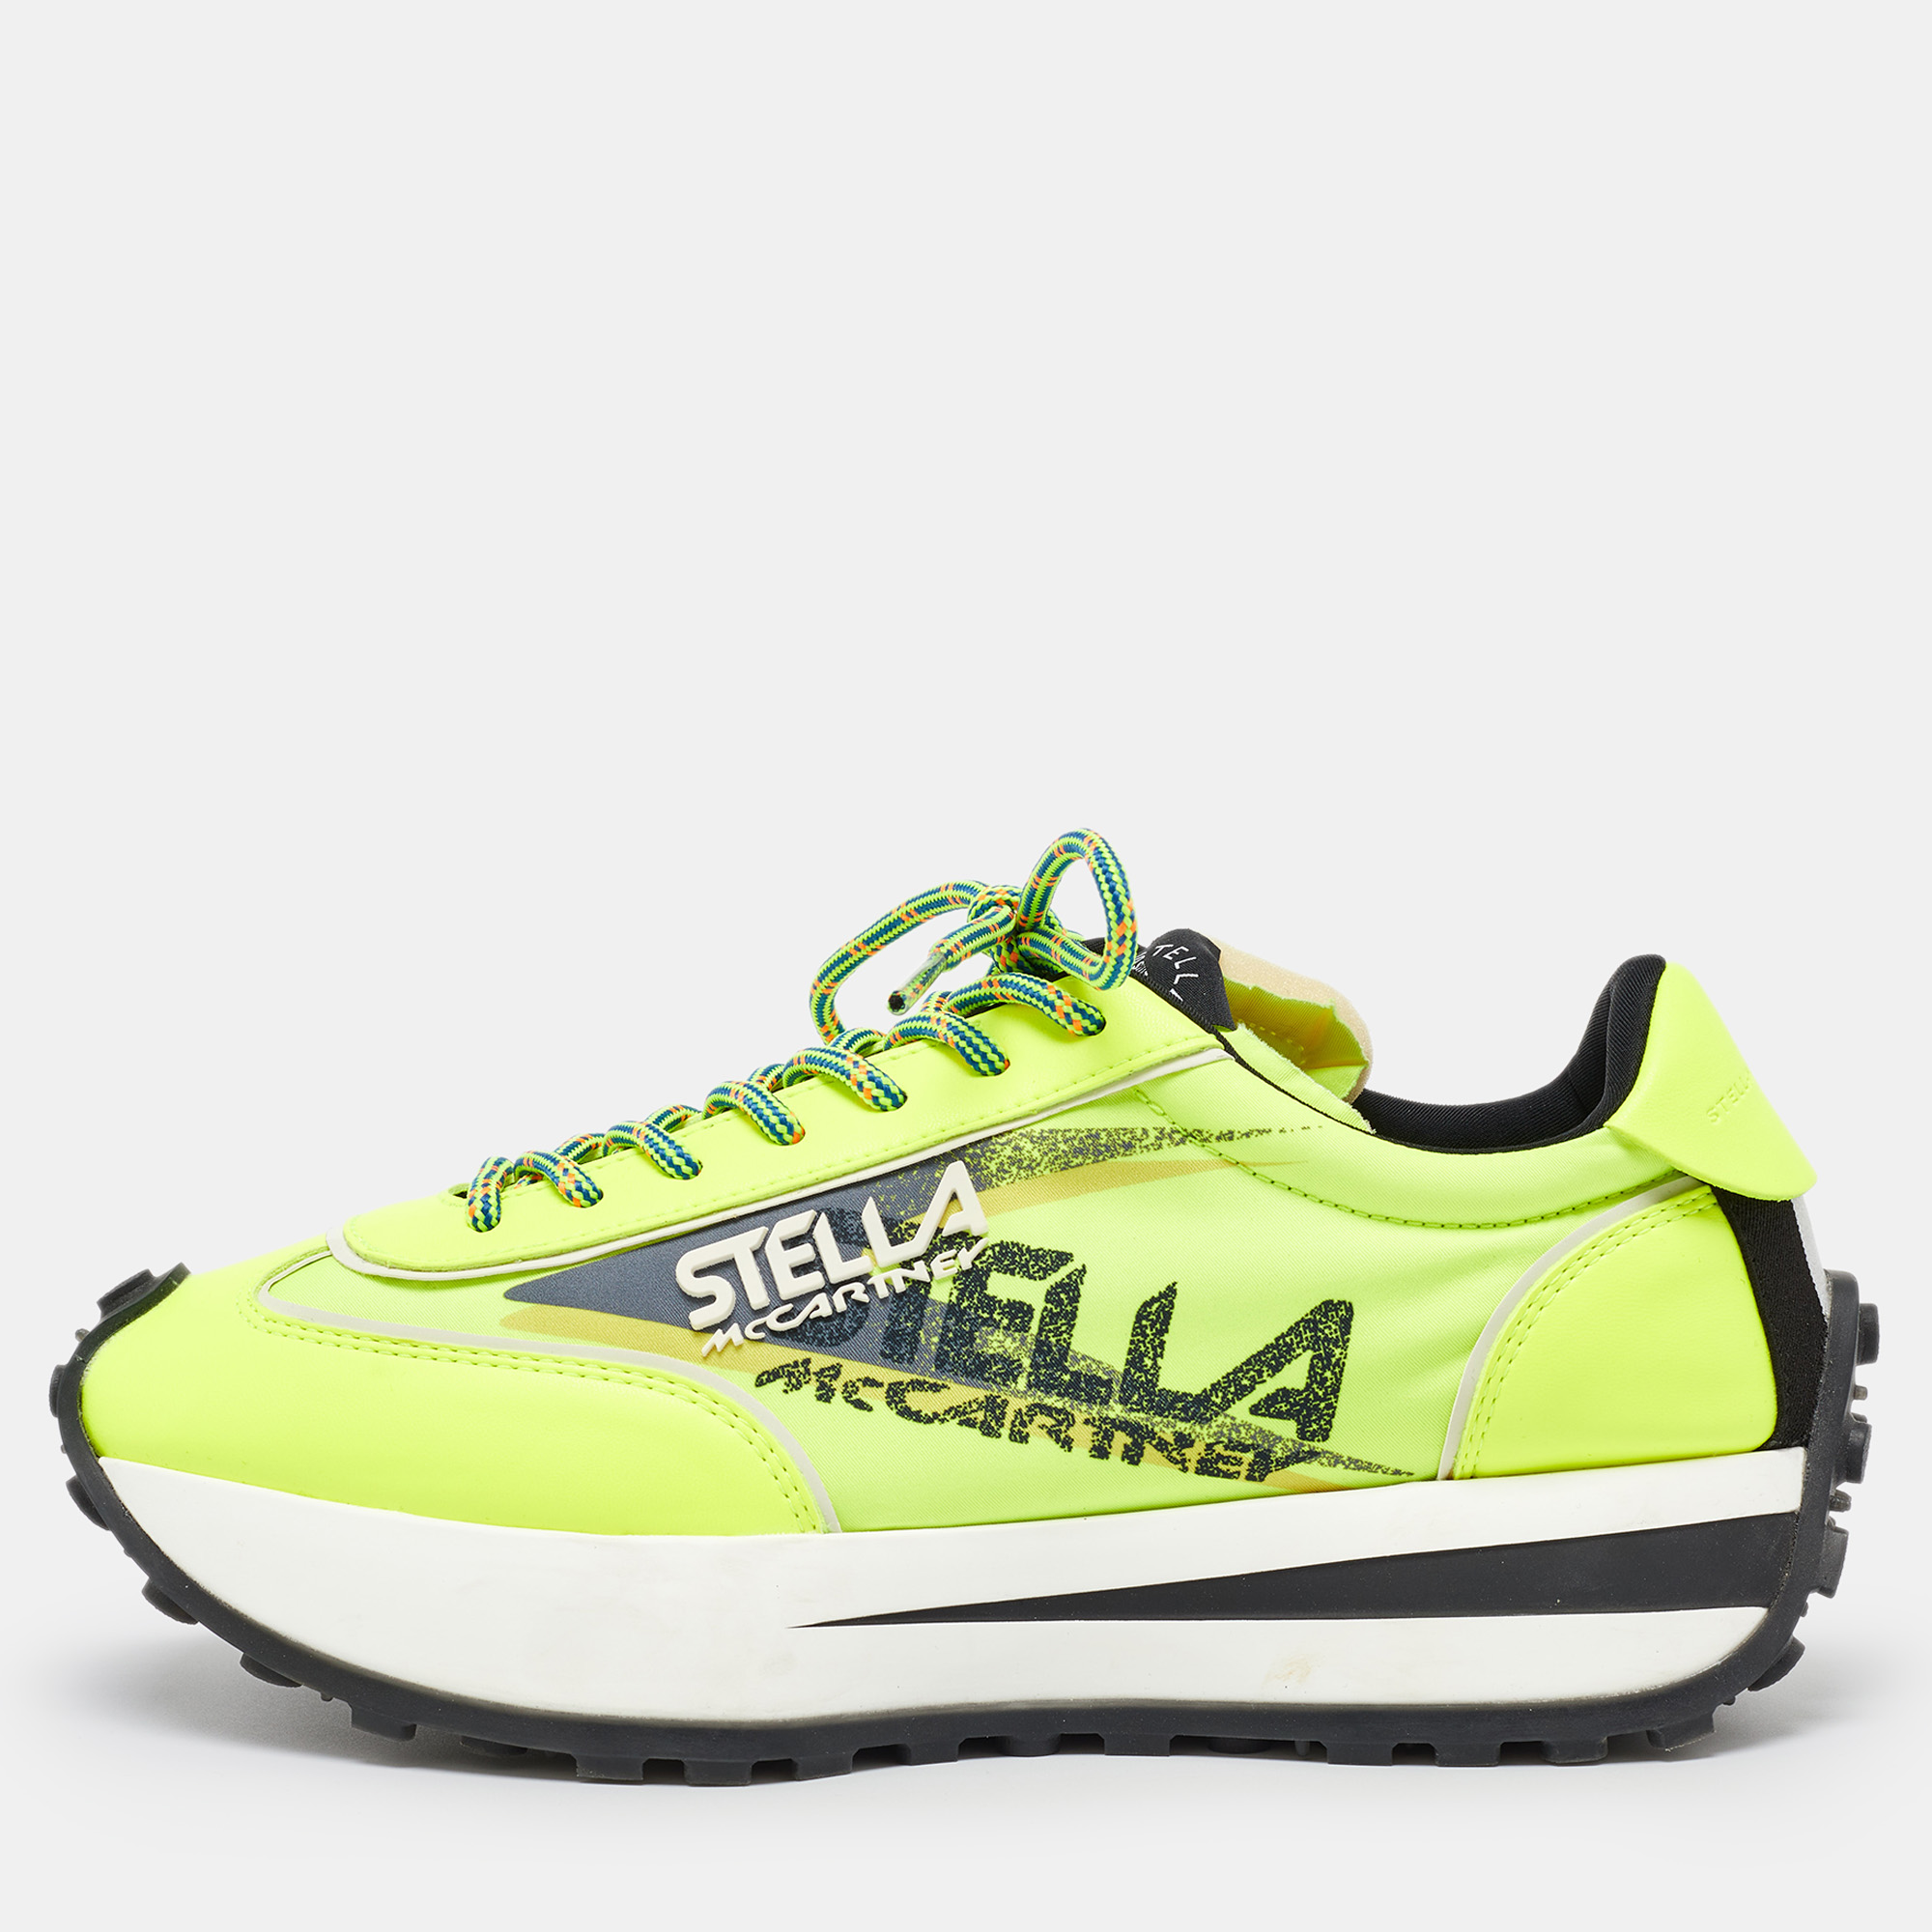 

Stella McCartney Neon Yellow Fabric and Leather Reclypse Sneakers Size